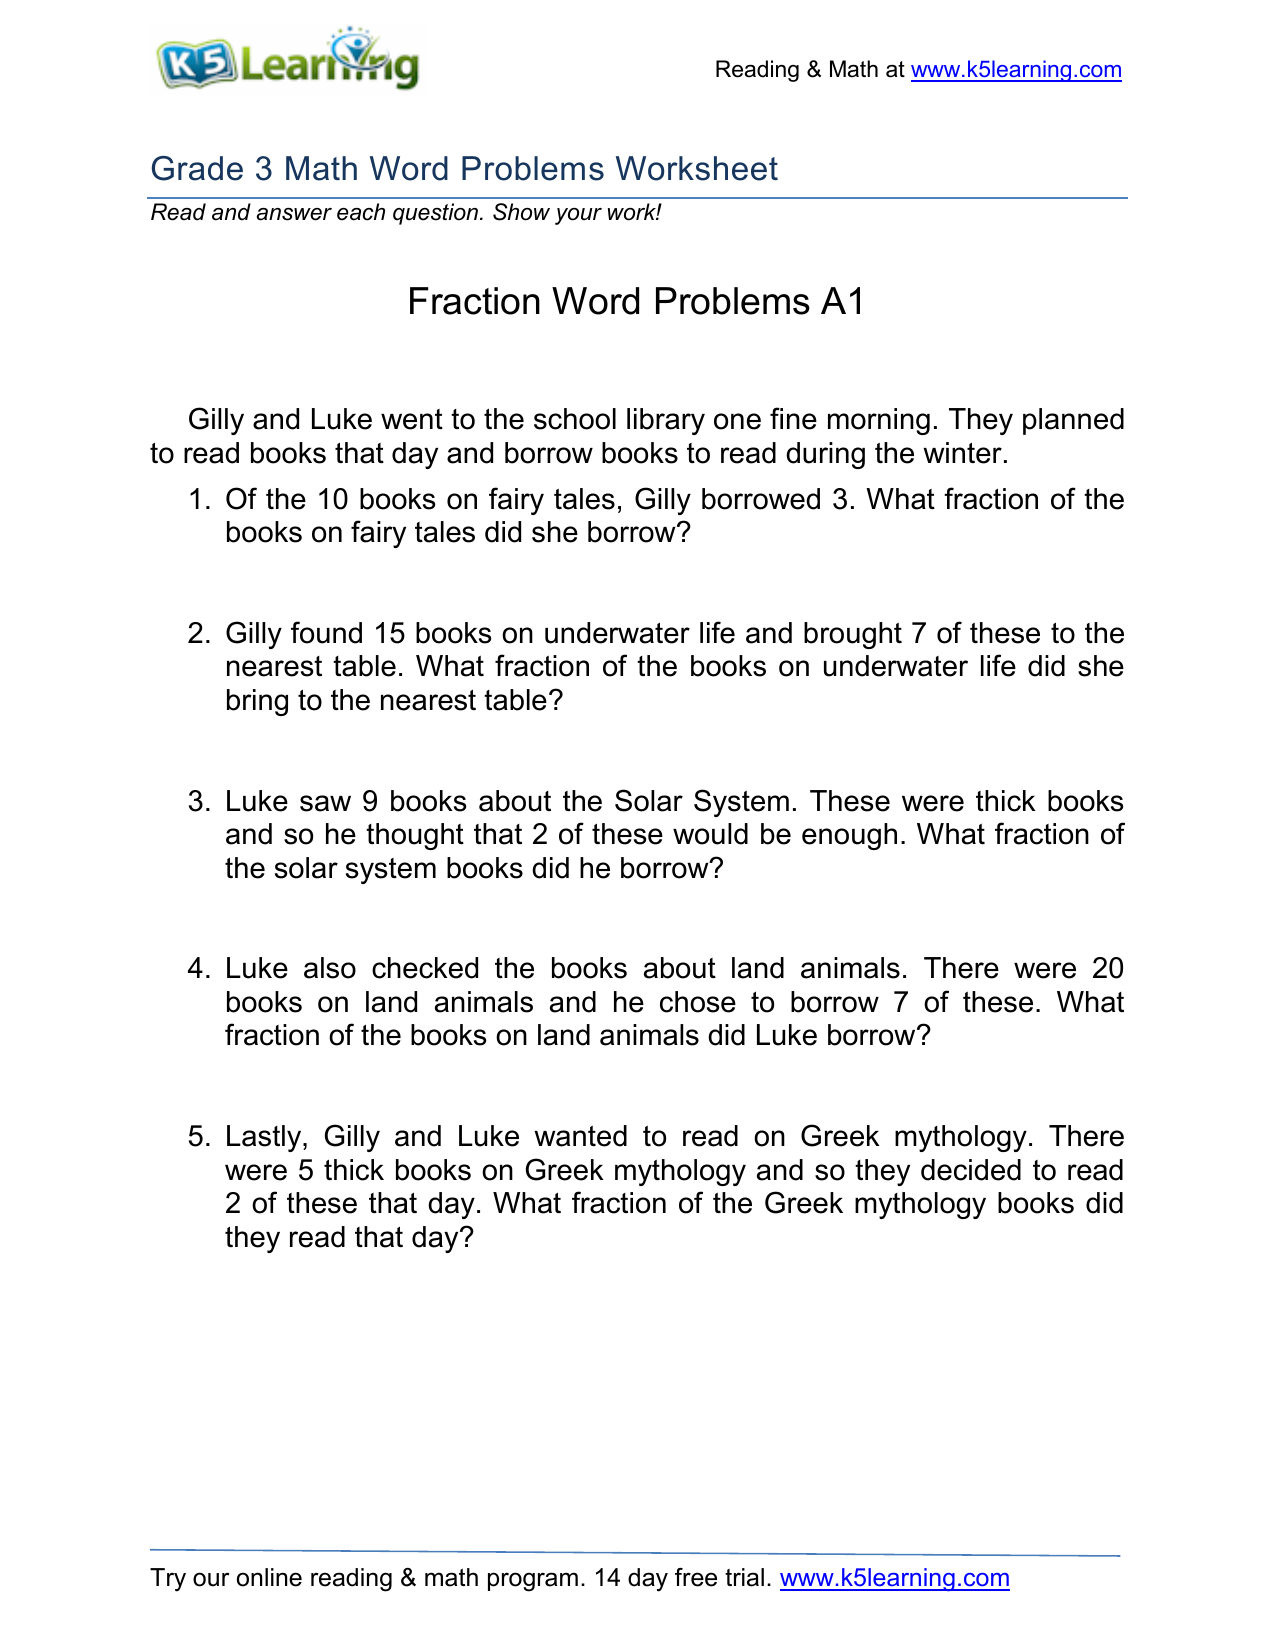 Fraction Word Problems A21 For Systems Word Problems Worksheet